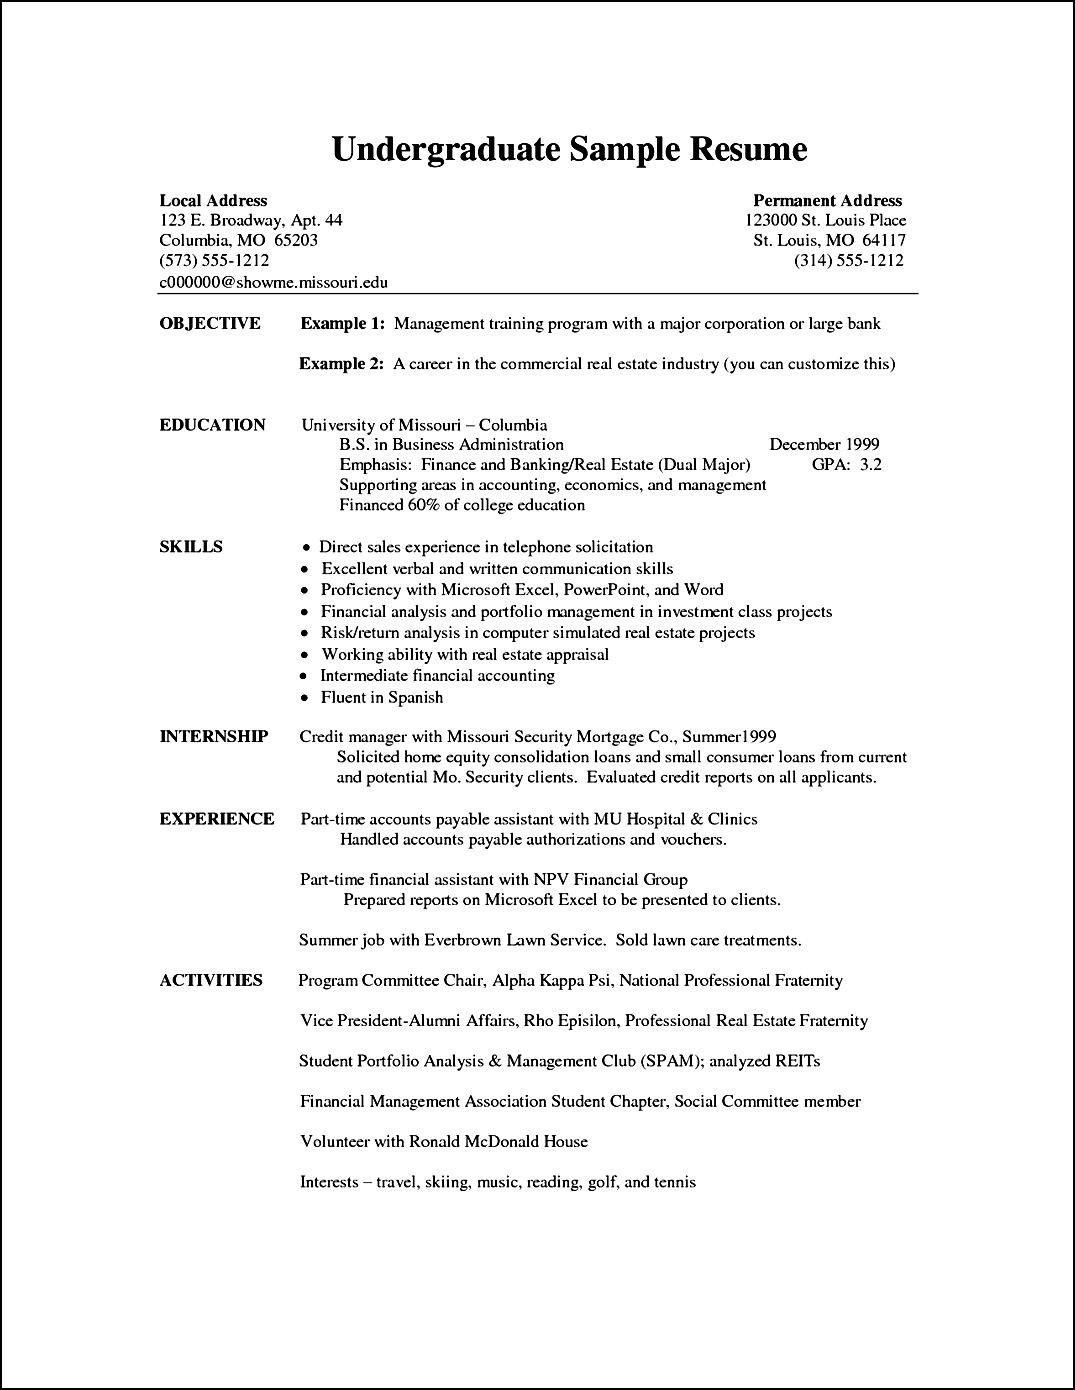 Resume Format Undergraduate Cv Examples Resume Format for size 1075 X 1390